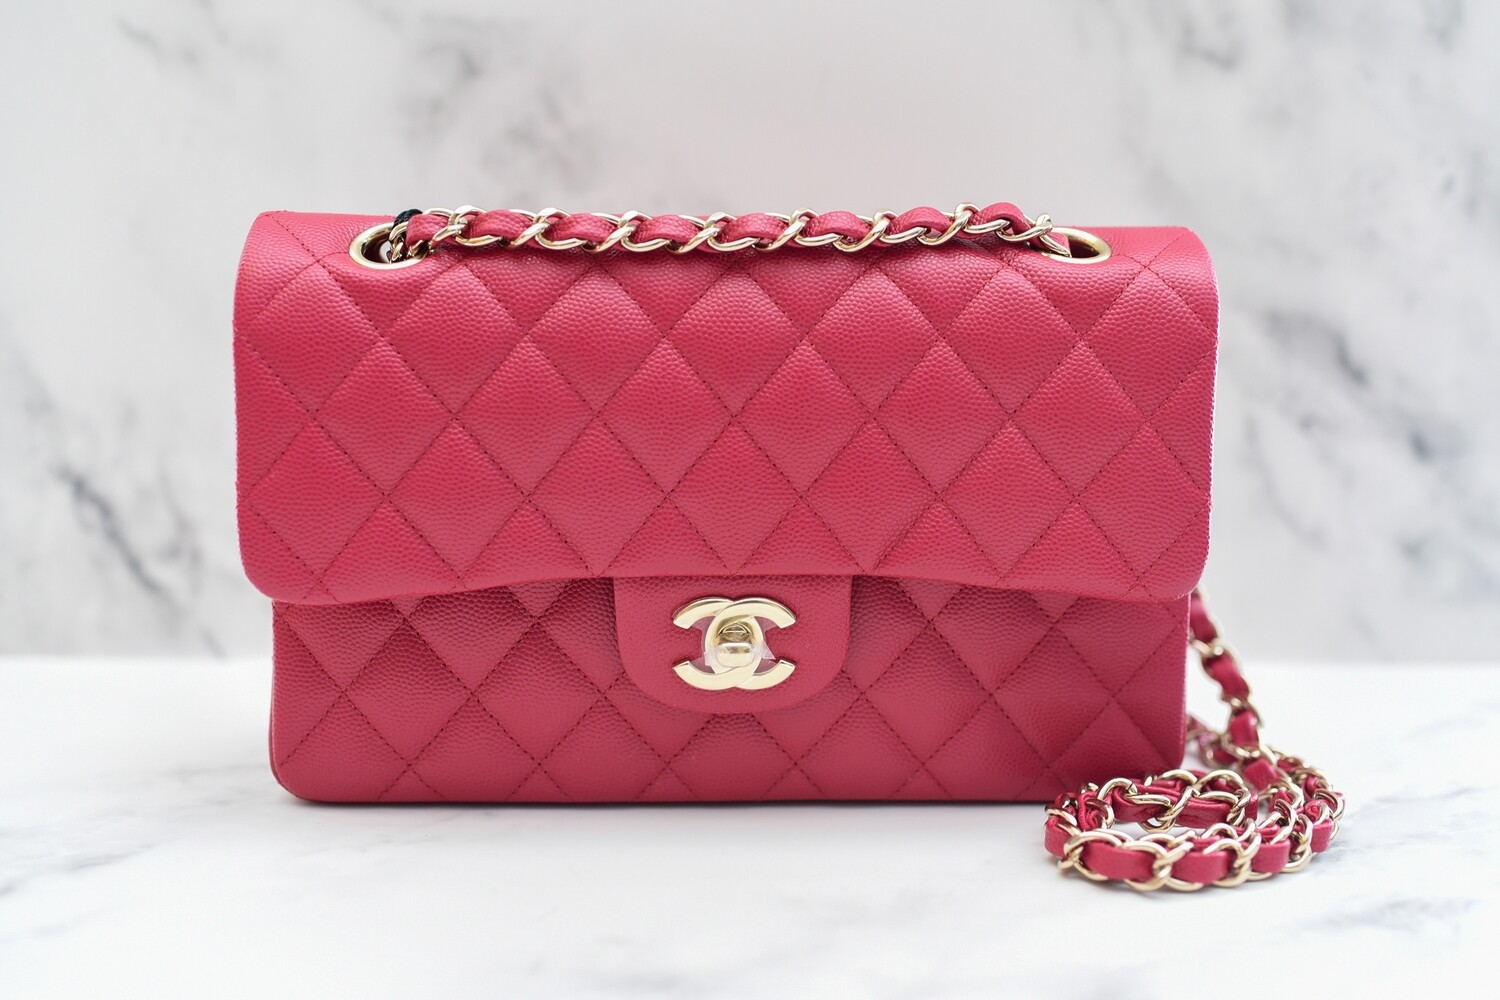 Chanel Classic Small Double Flap, Dark Pink Caviar Leather with Light Gold  Hardware, New in Box GA001 - Julia Rose Boston